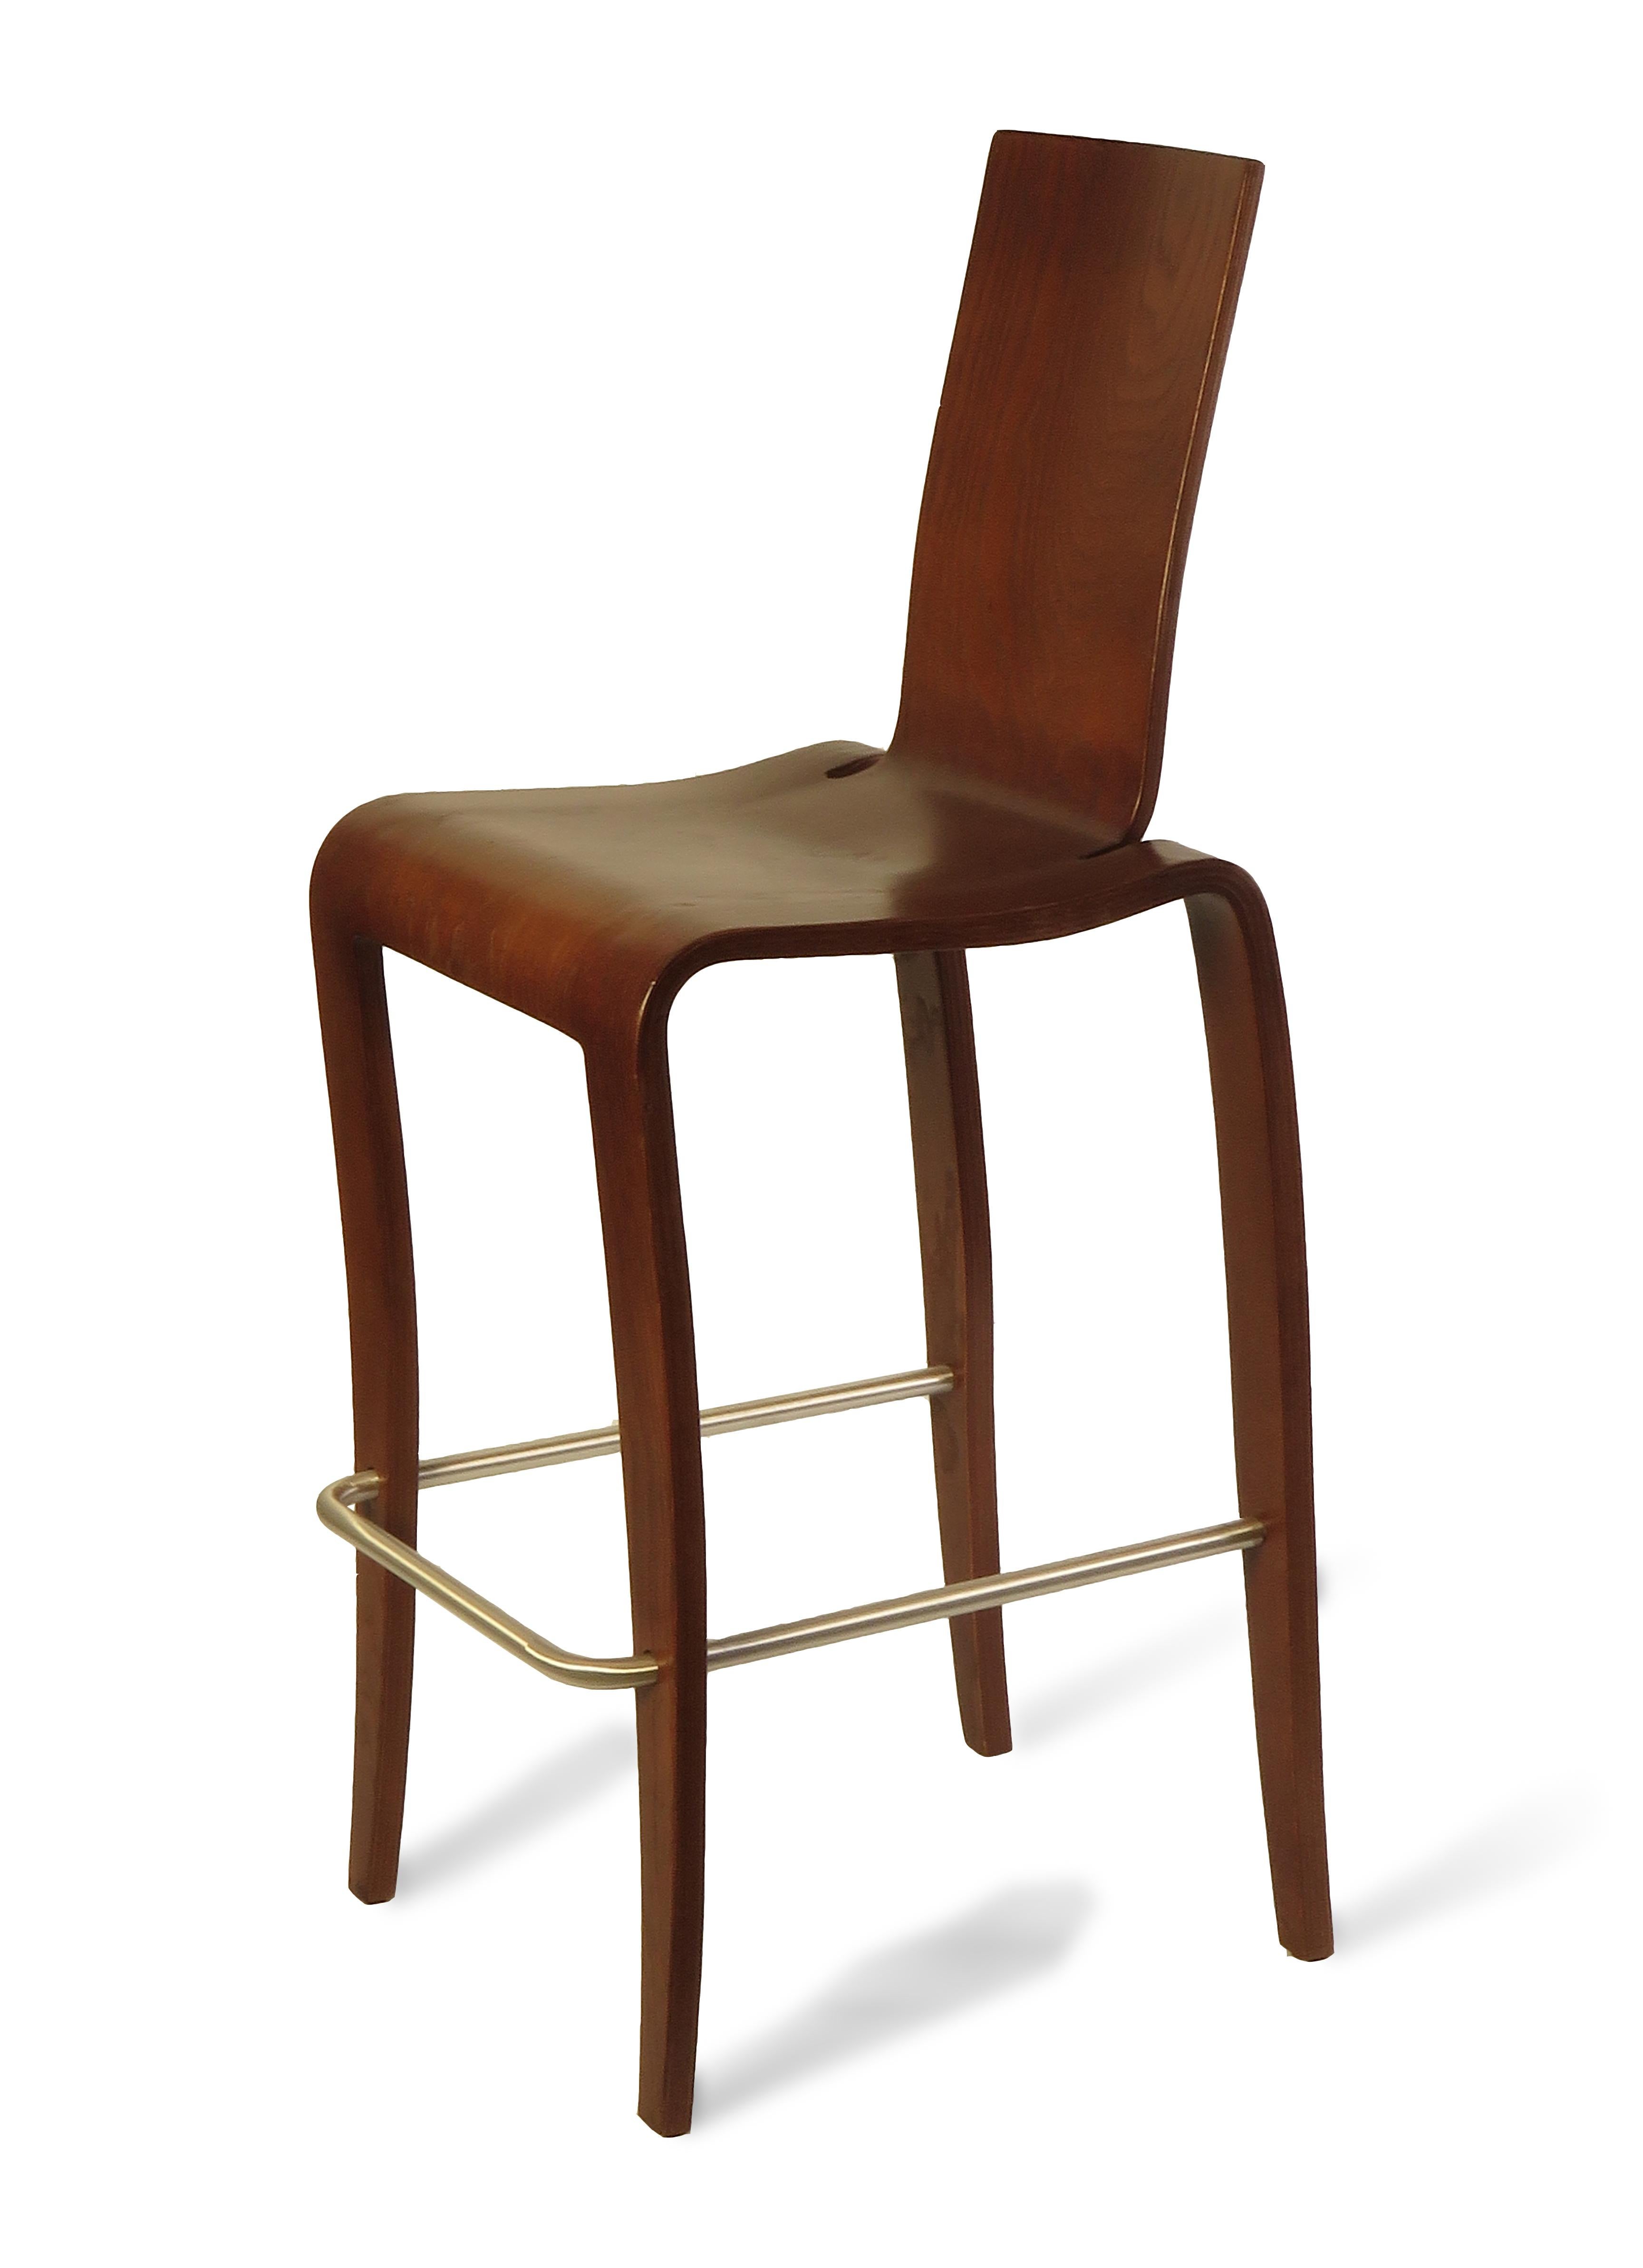 The Europa bar chair is signature Peter Danko aesthetic. The chair is molded from a single blanket of maple veneer.  Finish is walnut. The idea of molding a chair from a single piece of plywood is intriguing. Bar Chair features a brushed aluminum